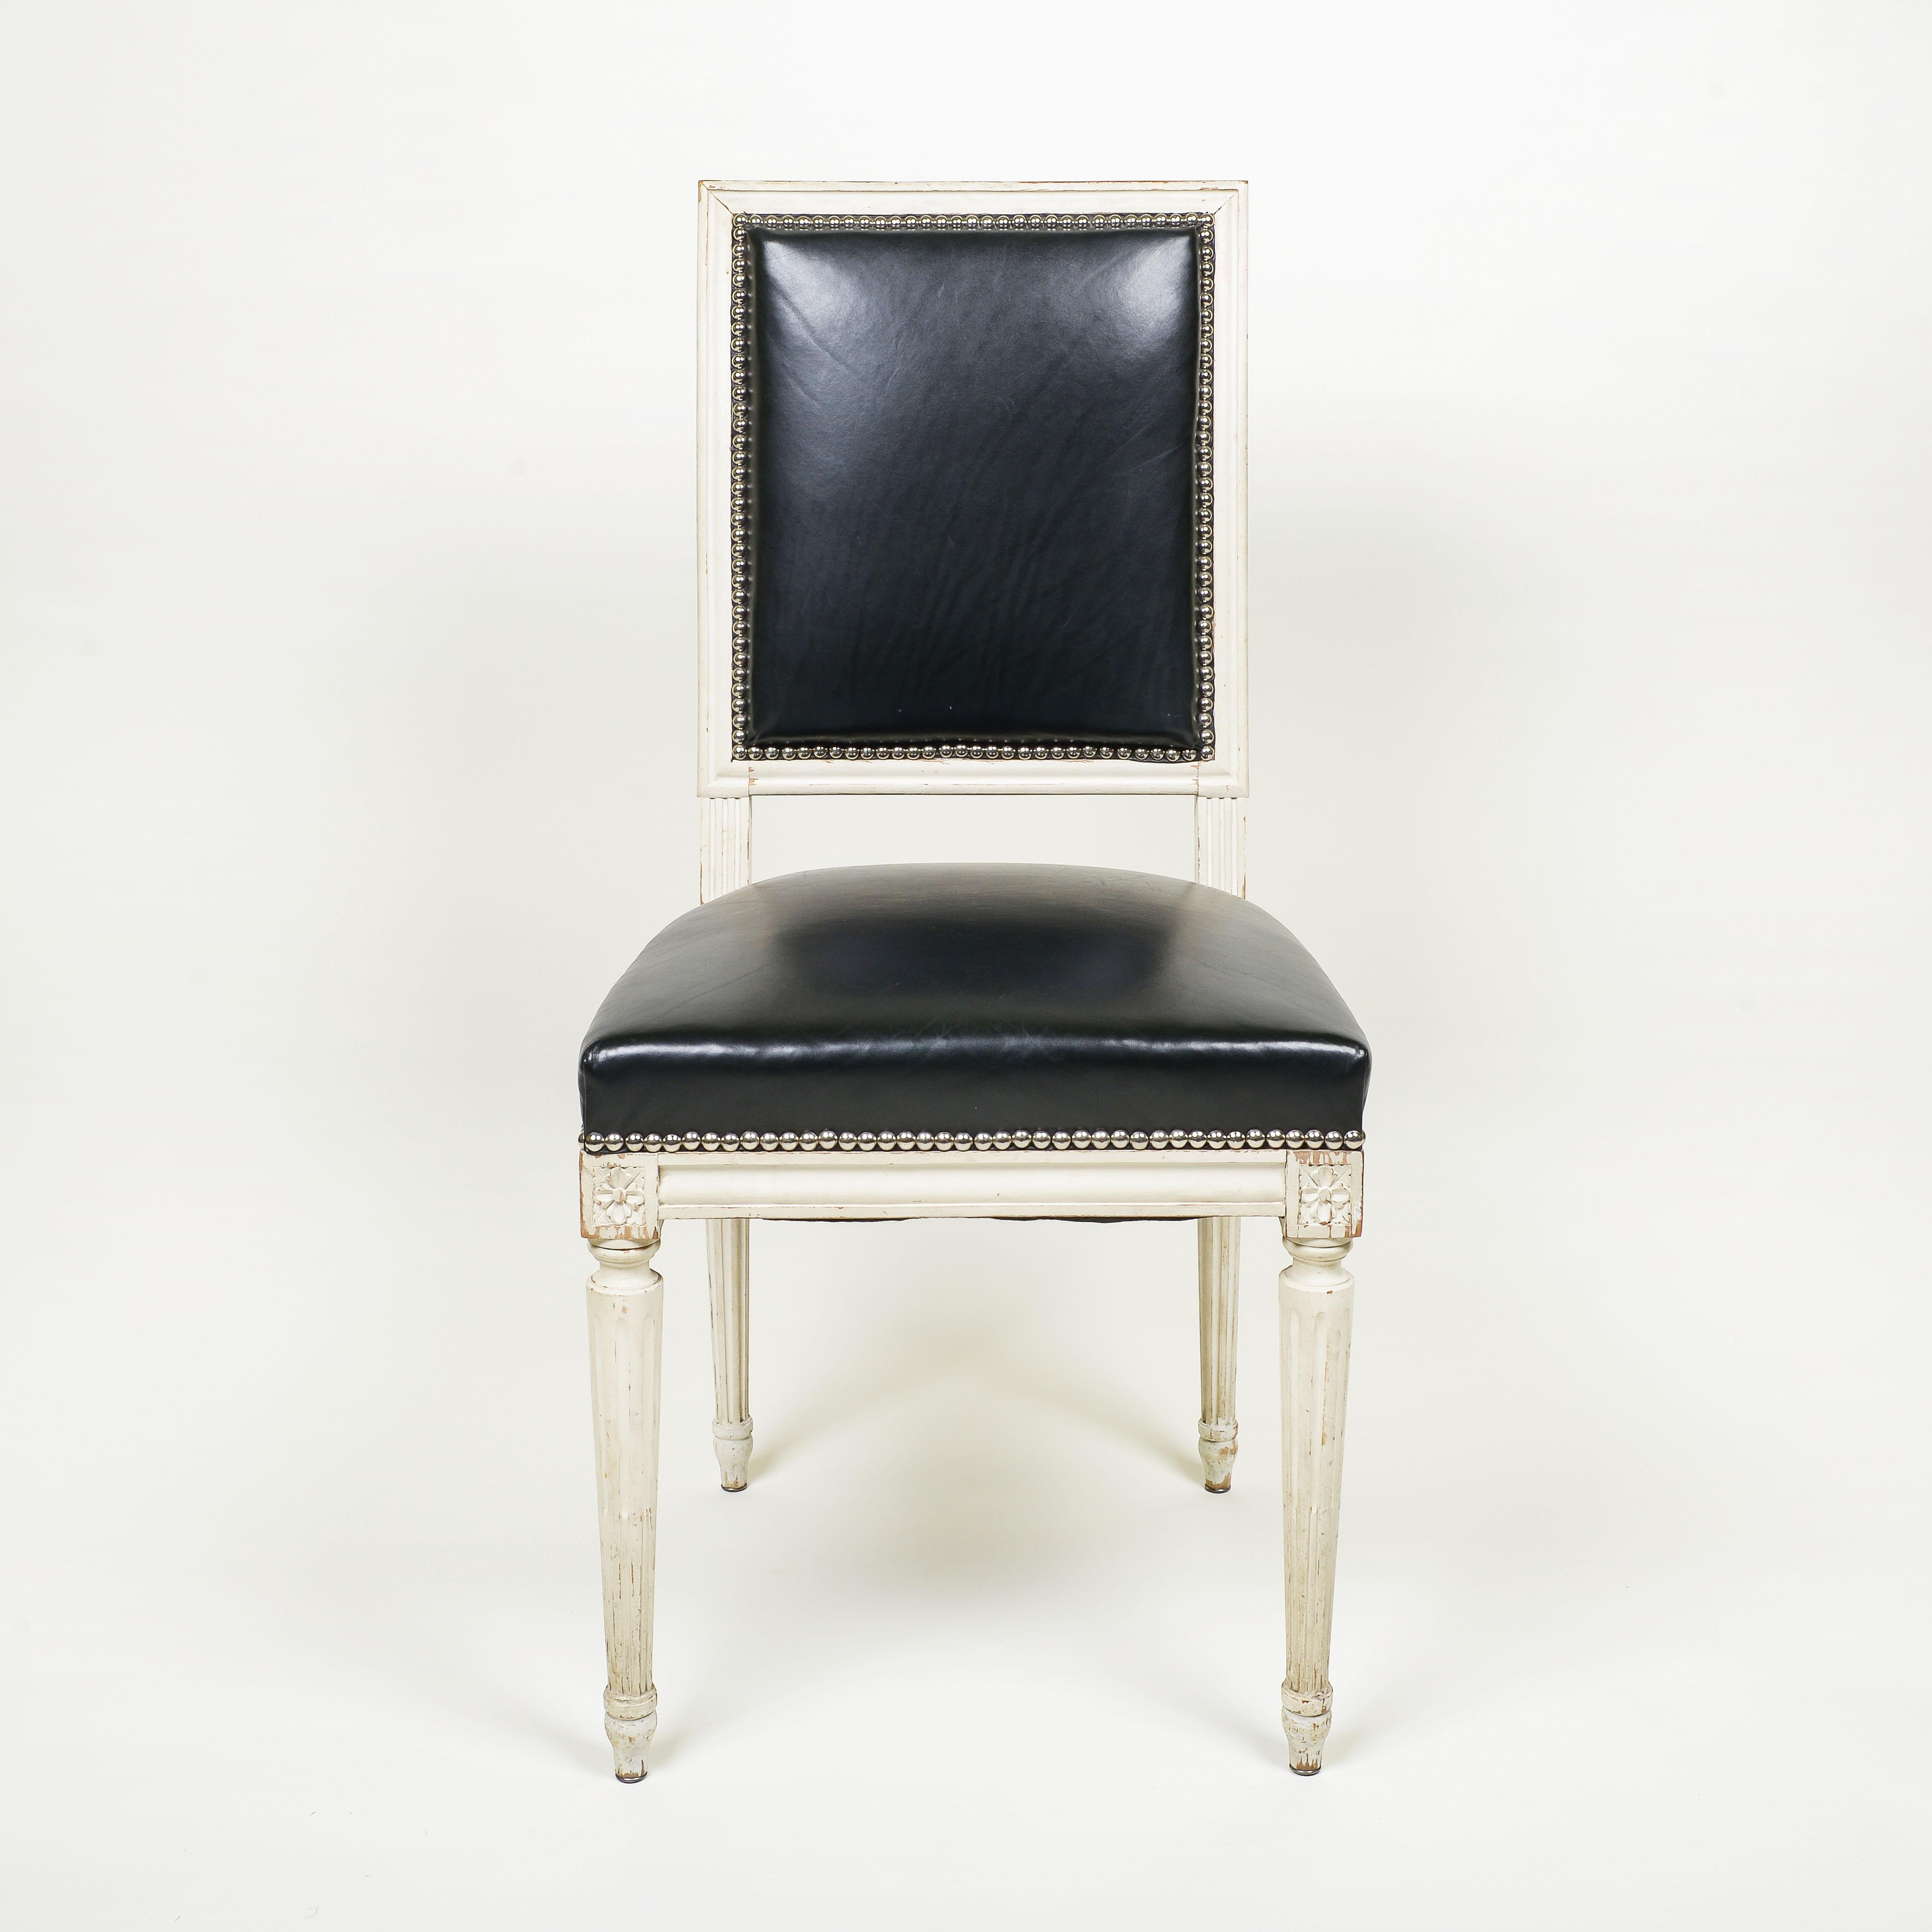 Each chair upholstered in black leather with nailhead trim; raised on fluted, round tapering legs.